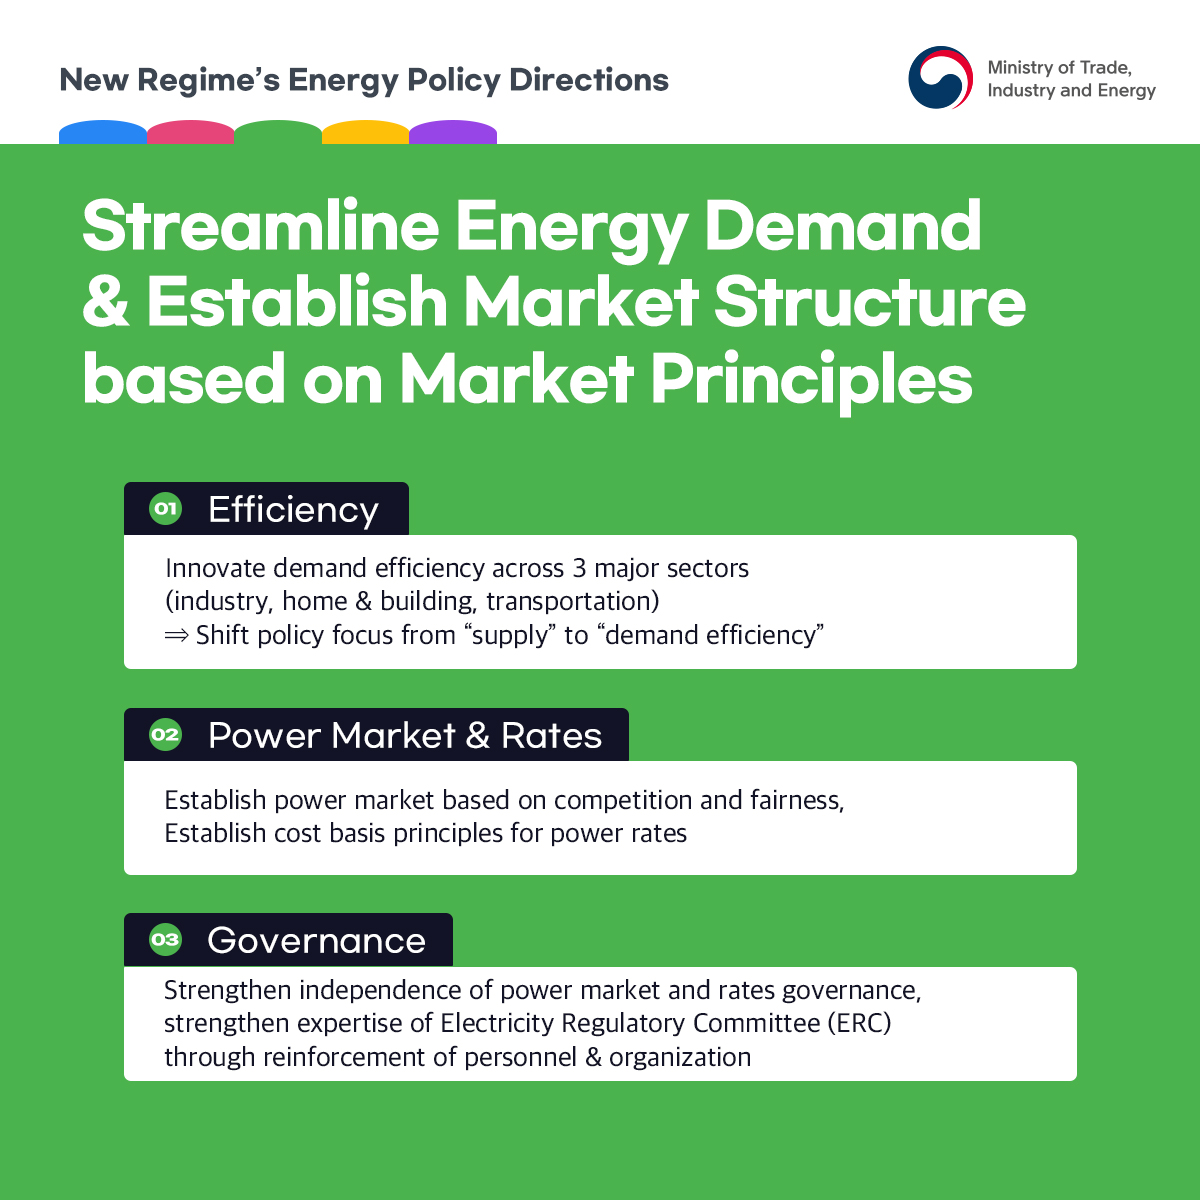 MOTIE announces New Regime's Energy Policy Directions Image 2